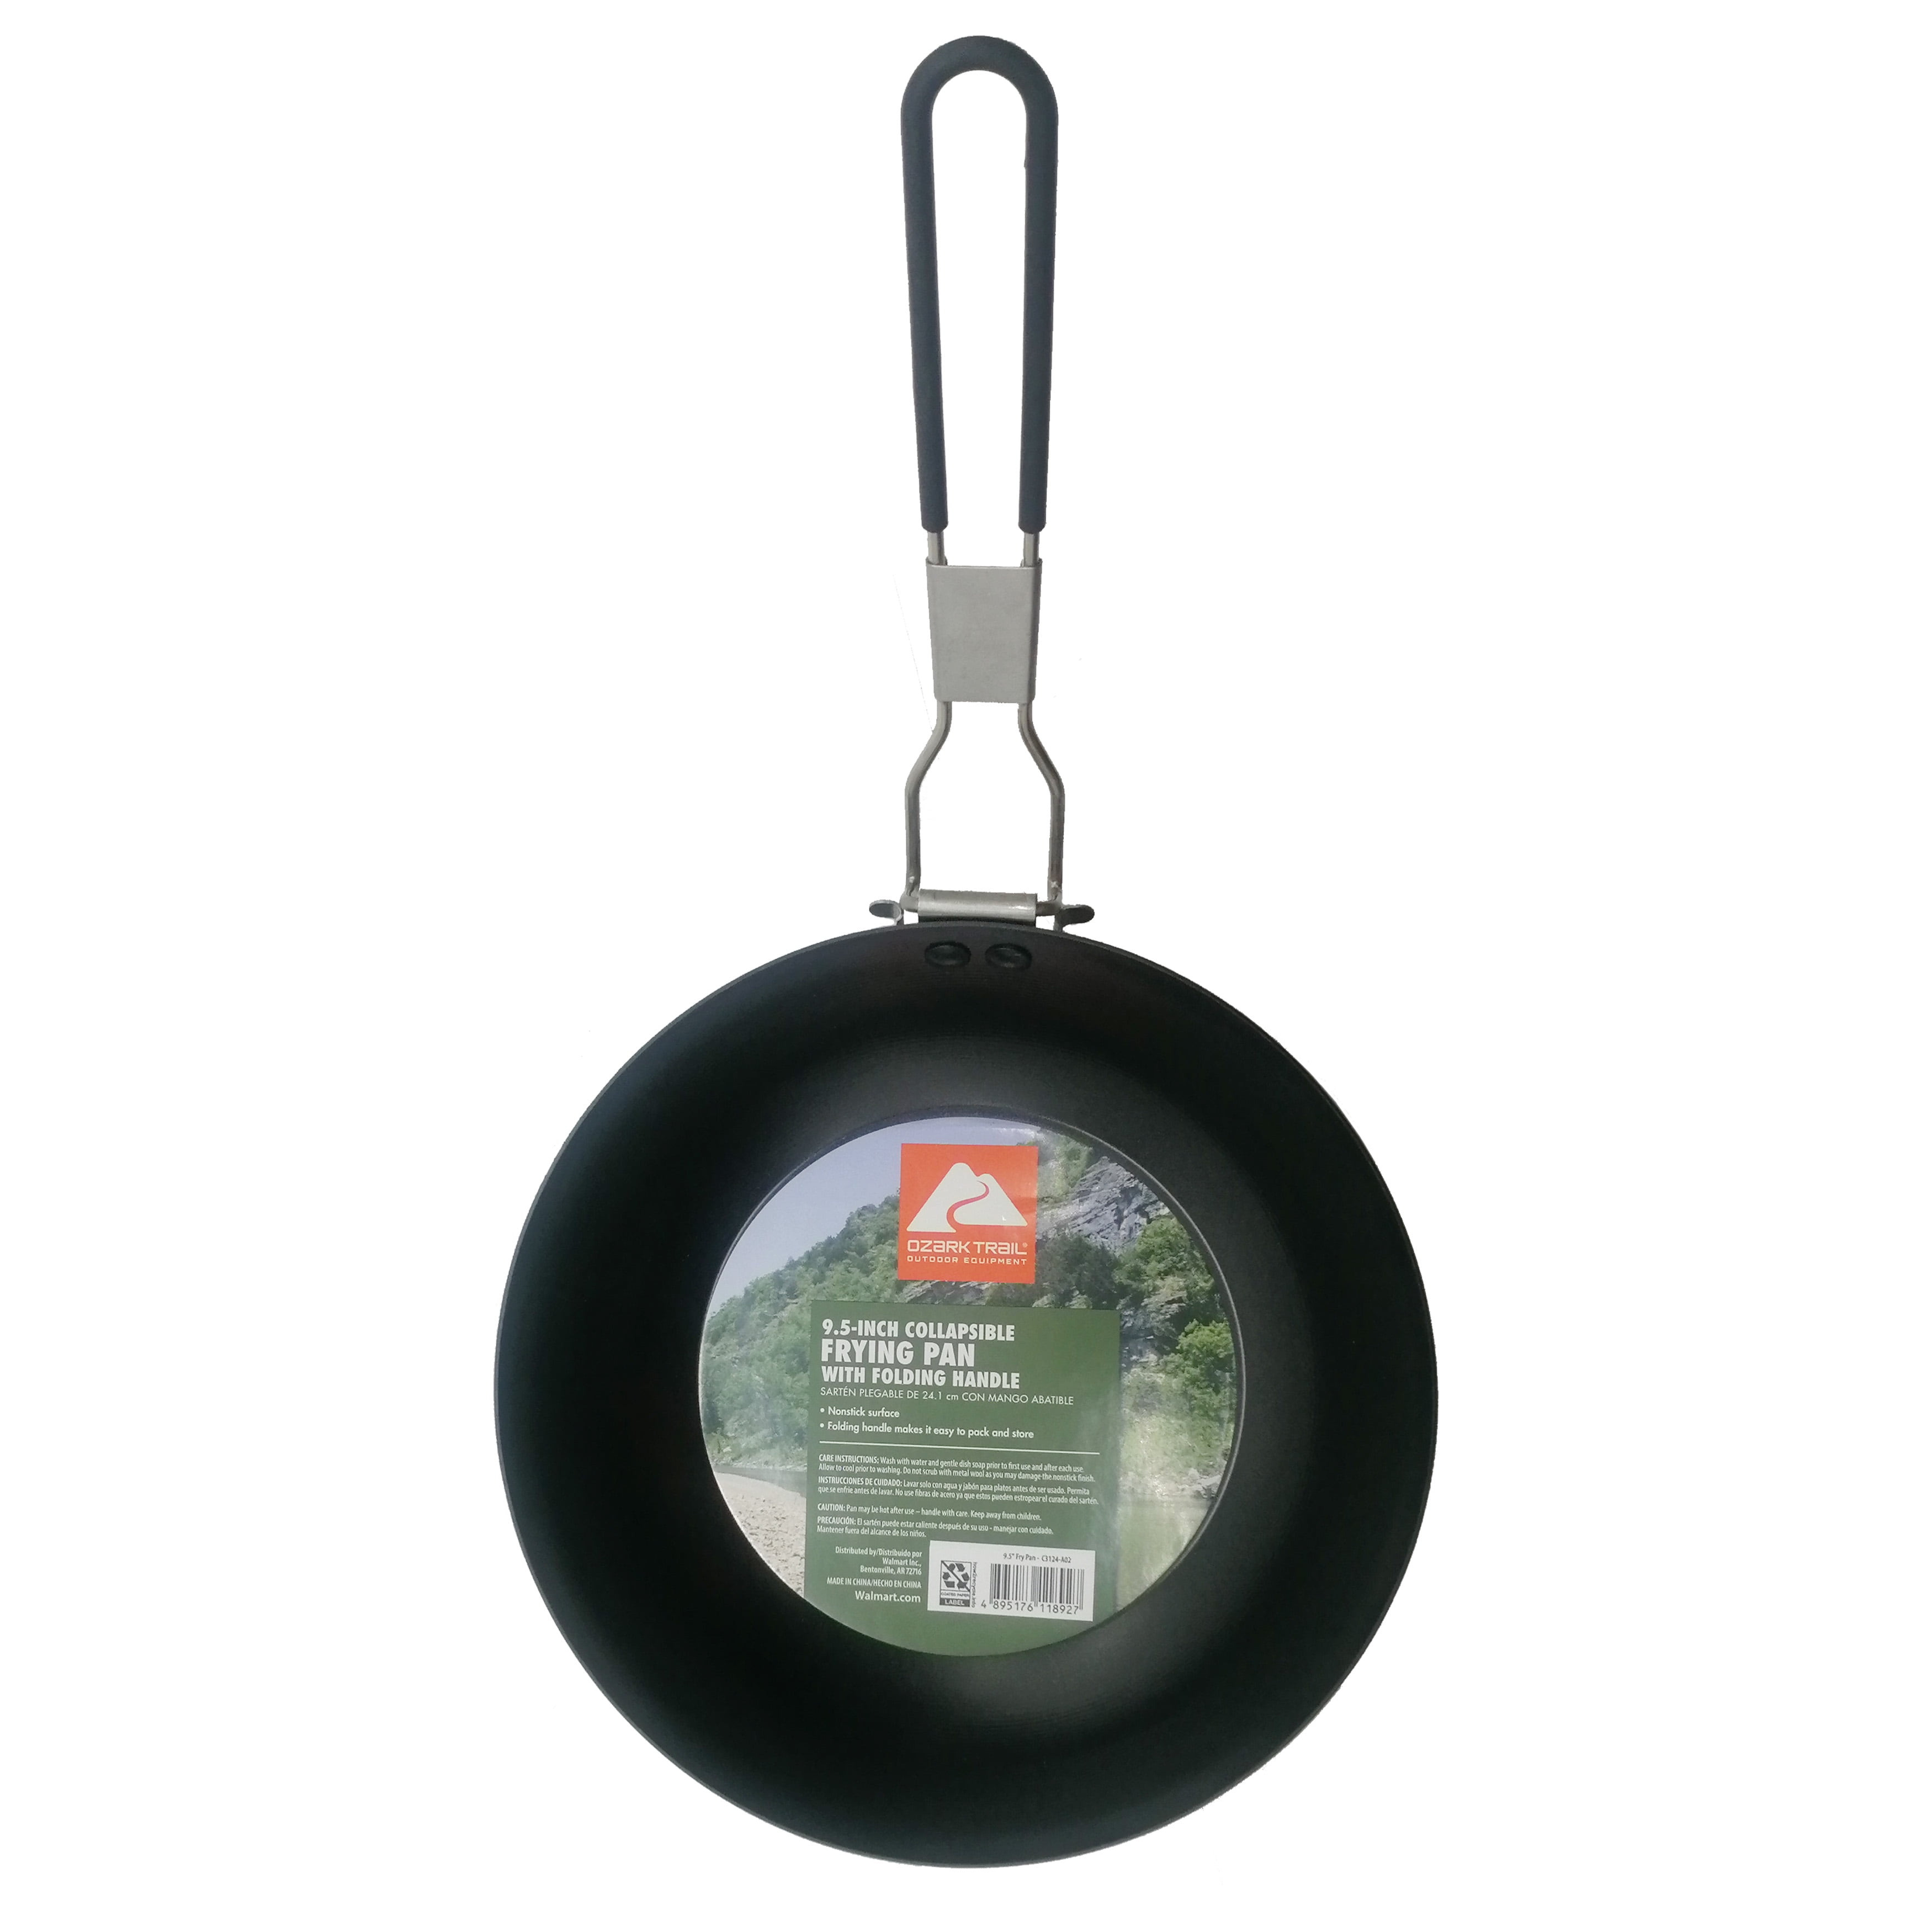 BESPORTBLE Outdoor Folding Frying pan campchefcooking Griddle Camping  Skillet Non-Stick Frying pan Camping pan Wok pan with lid nonstick Frying  pan